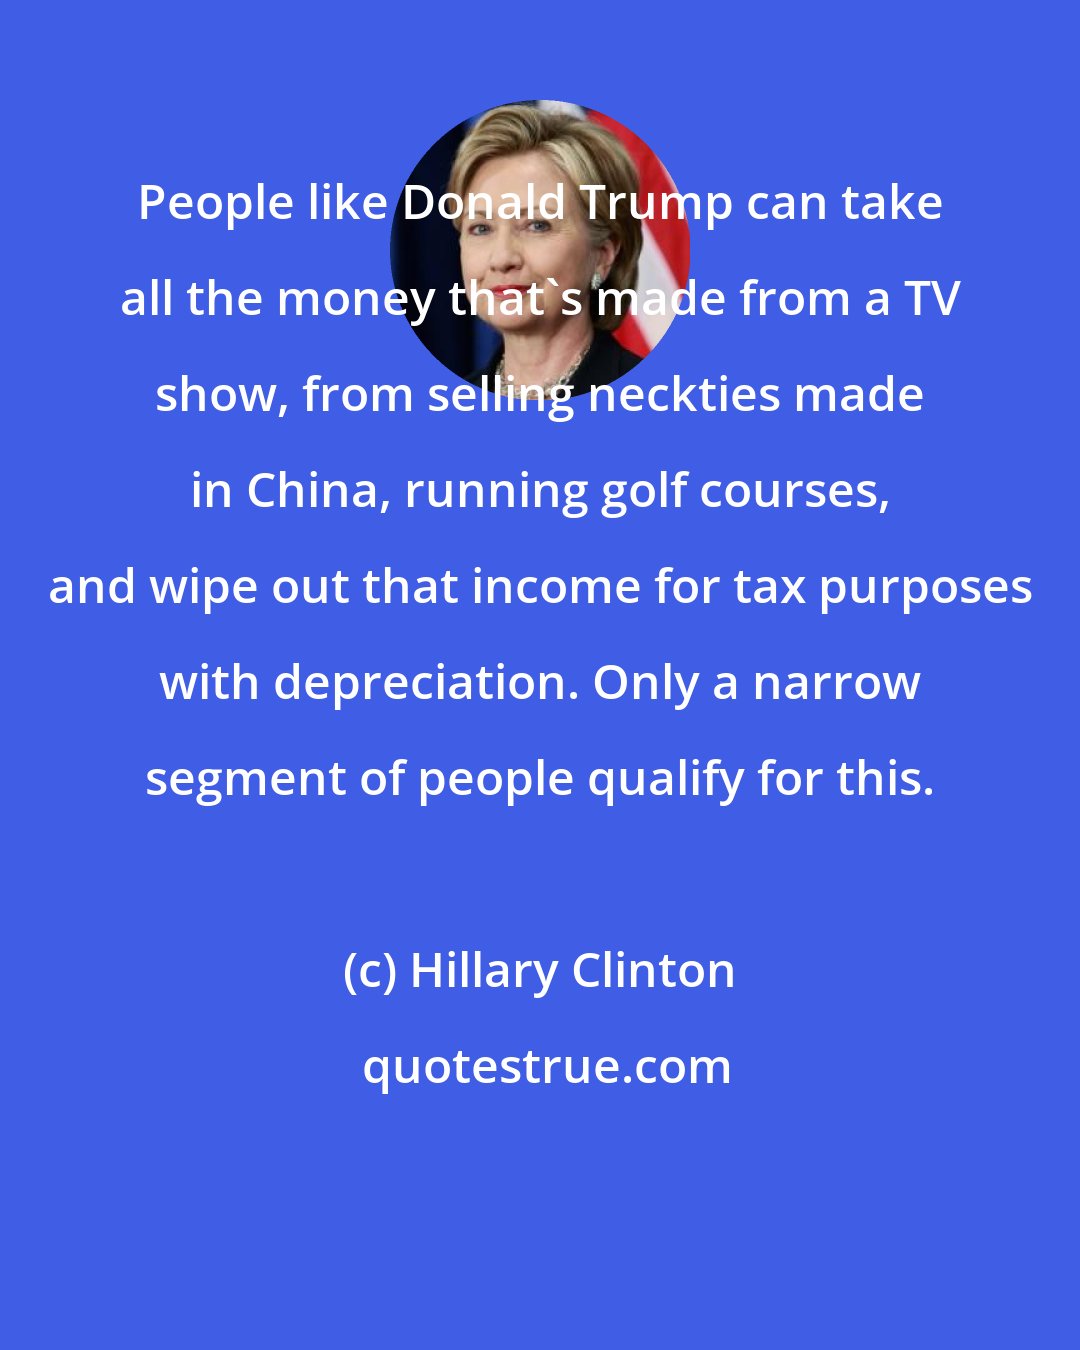 Hillary Clinton: People like Donald Trump can take all the money that's made from a TV show, from selling neckties made in China, running golf courses, and wipe out that income for tax purposes with depreciation. Only a narrow segment of people qualify for this.